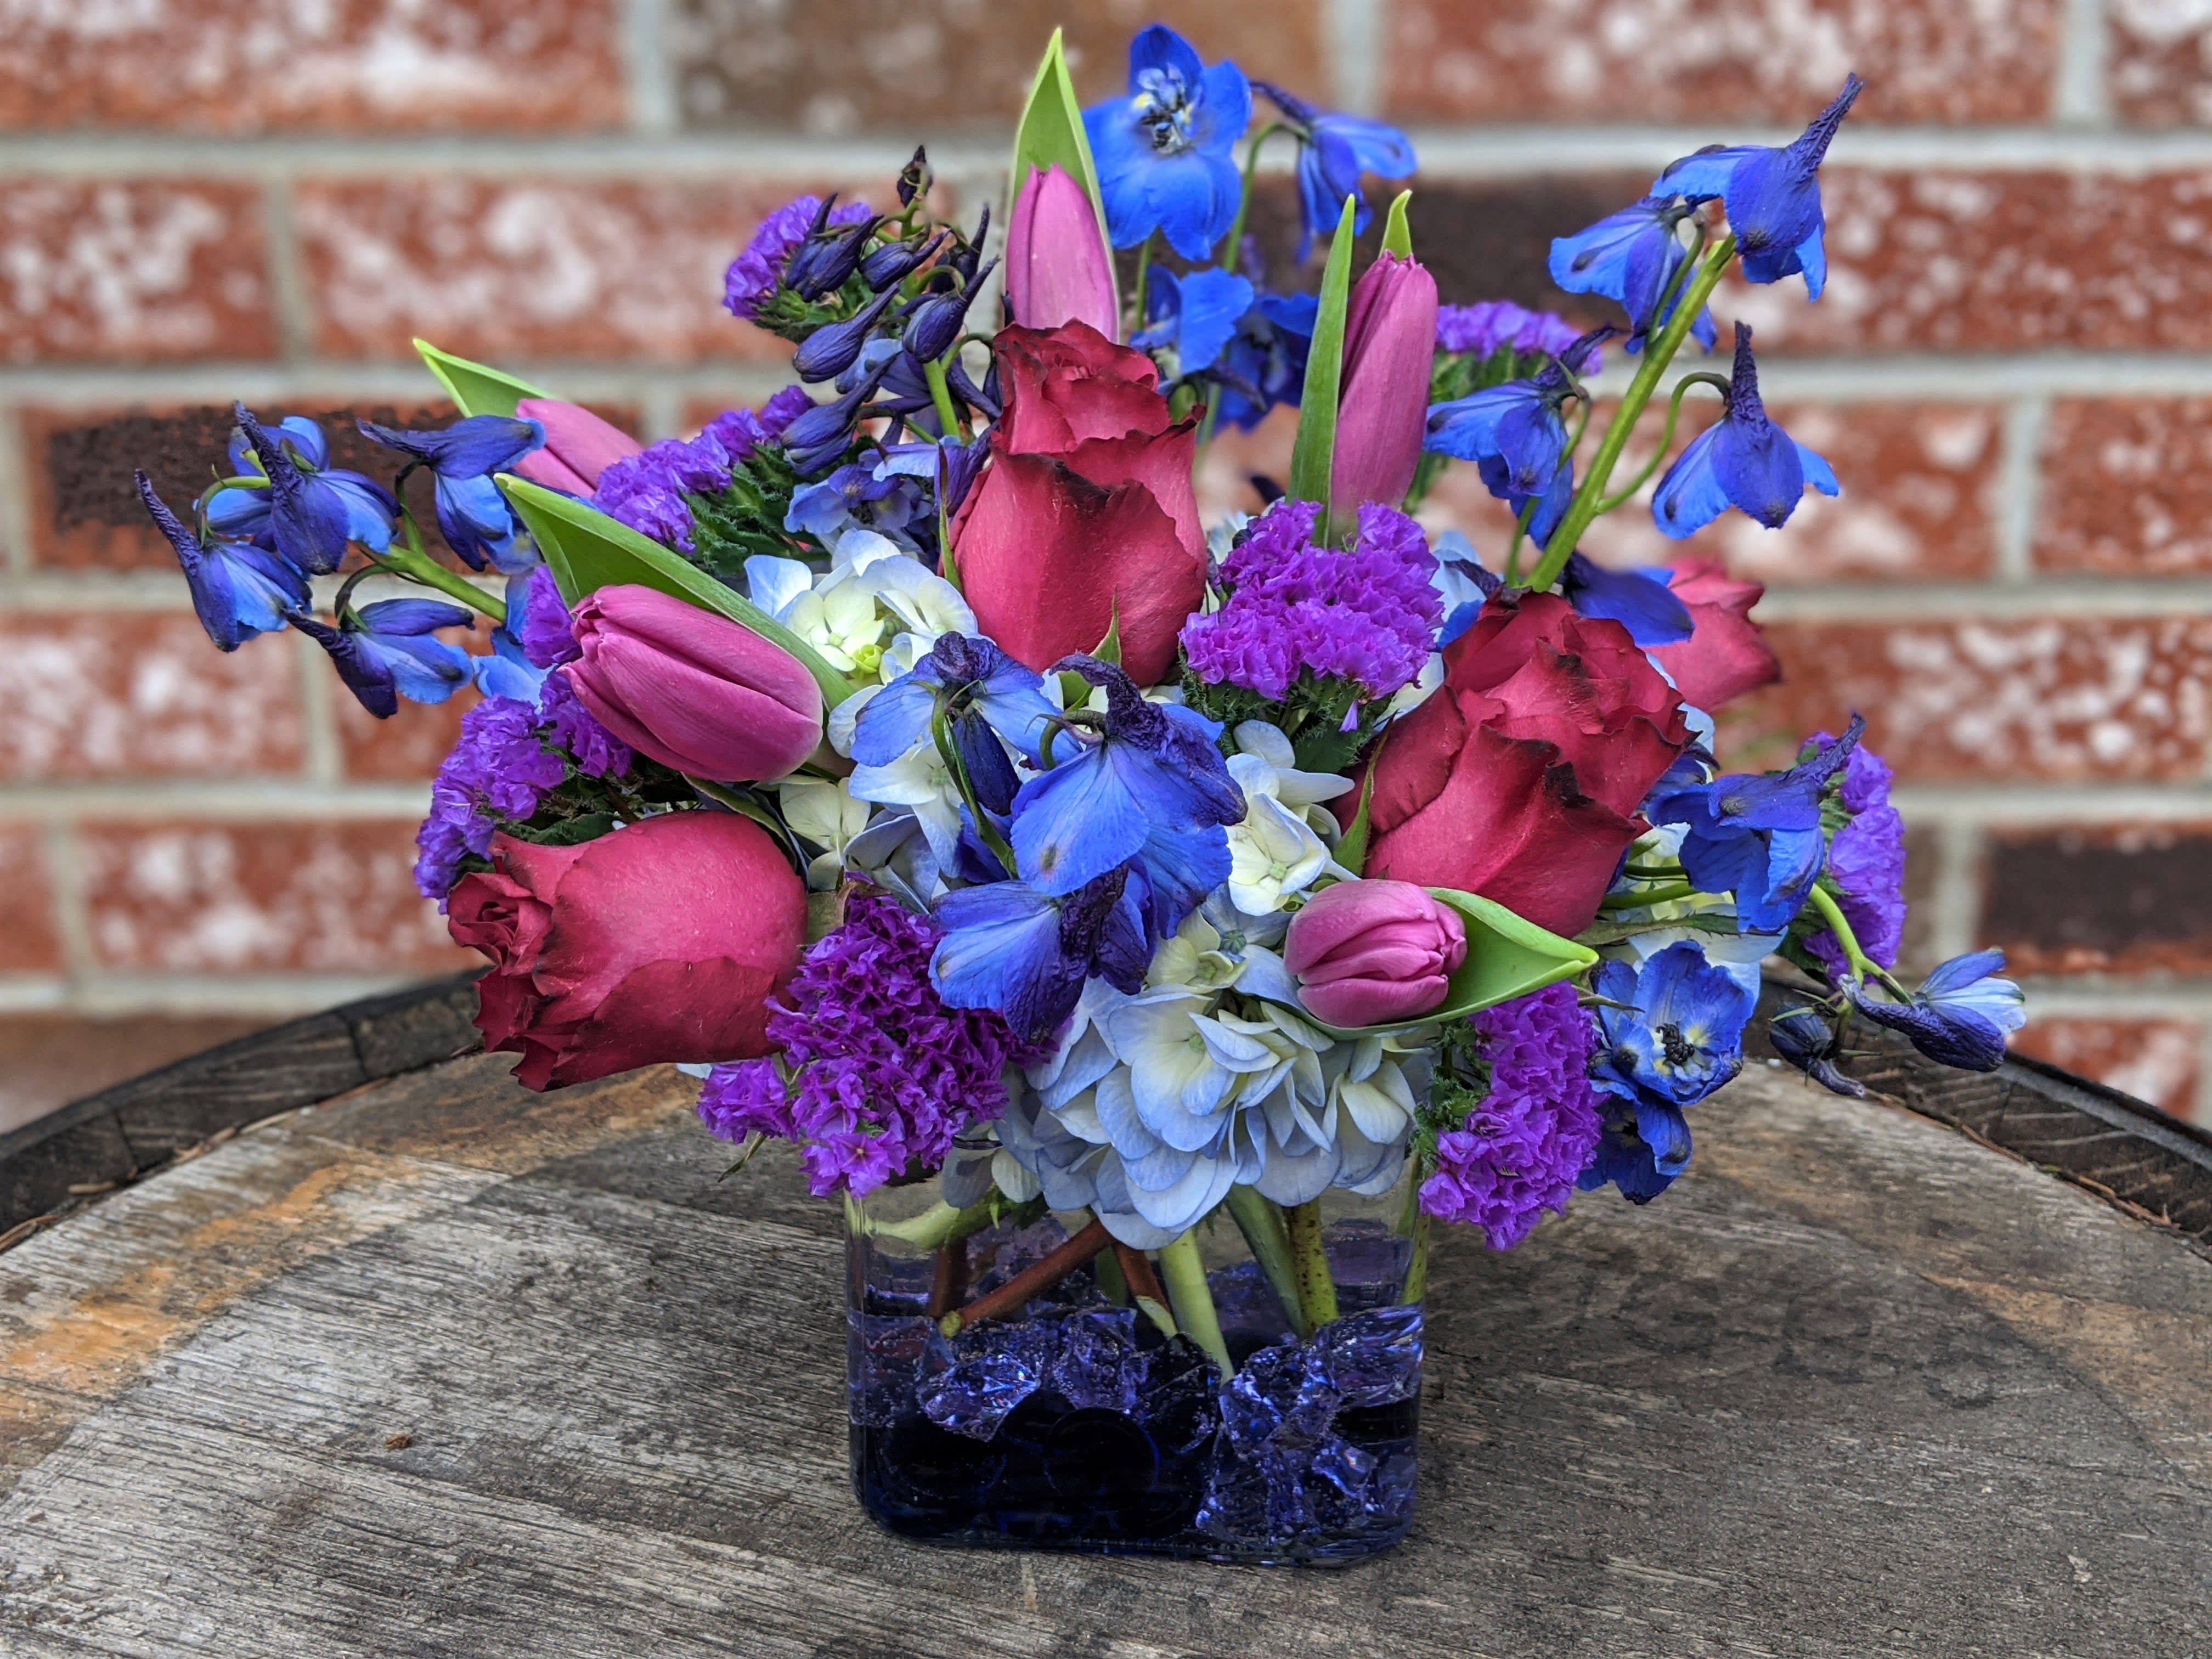 Blueberry Fields - Shown as Standard Blueberry roses, hydrangea, statice, tulips and delphinium comes arranged in a clear glass cube with accenting beads. *We custom design this arrangement and use the freshest flowers available the day of delivery. The arrangement in this picture is an example of the size and style and may not feature the exact product shown.*